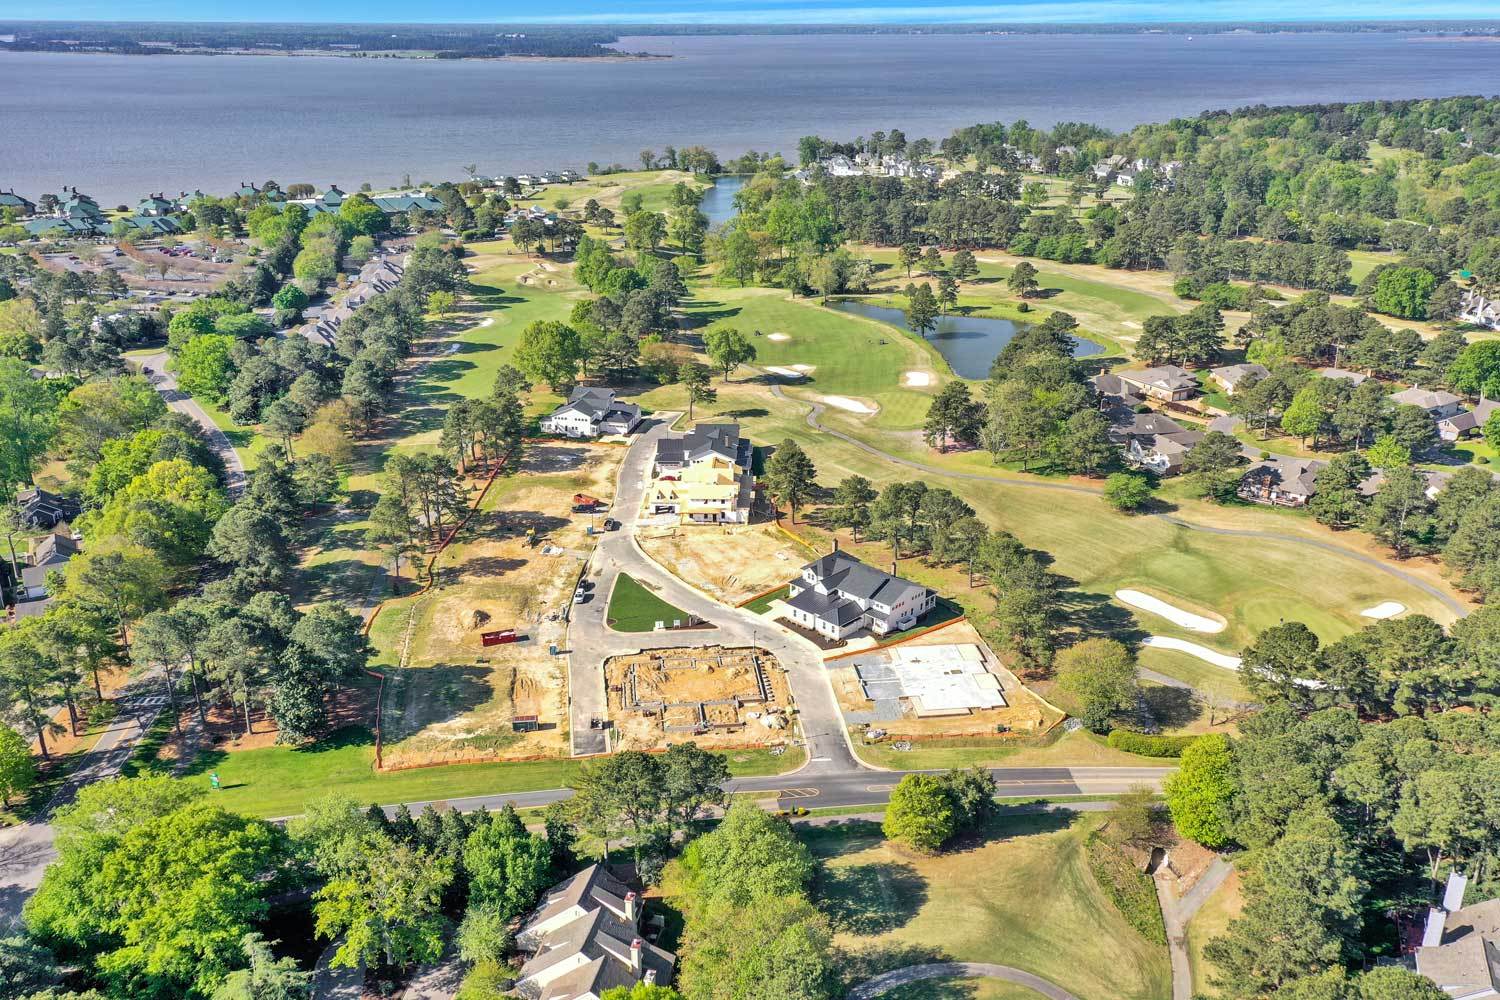 THE ENCLAVE AT KINGSMILL